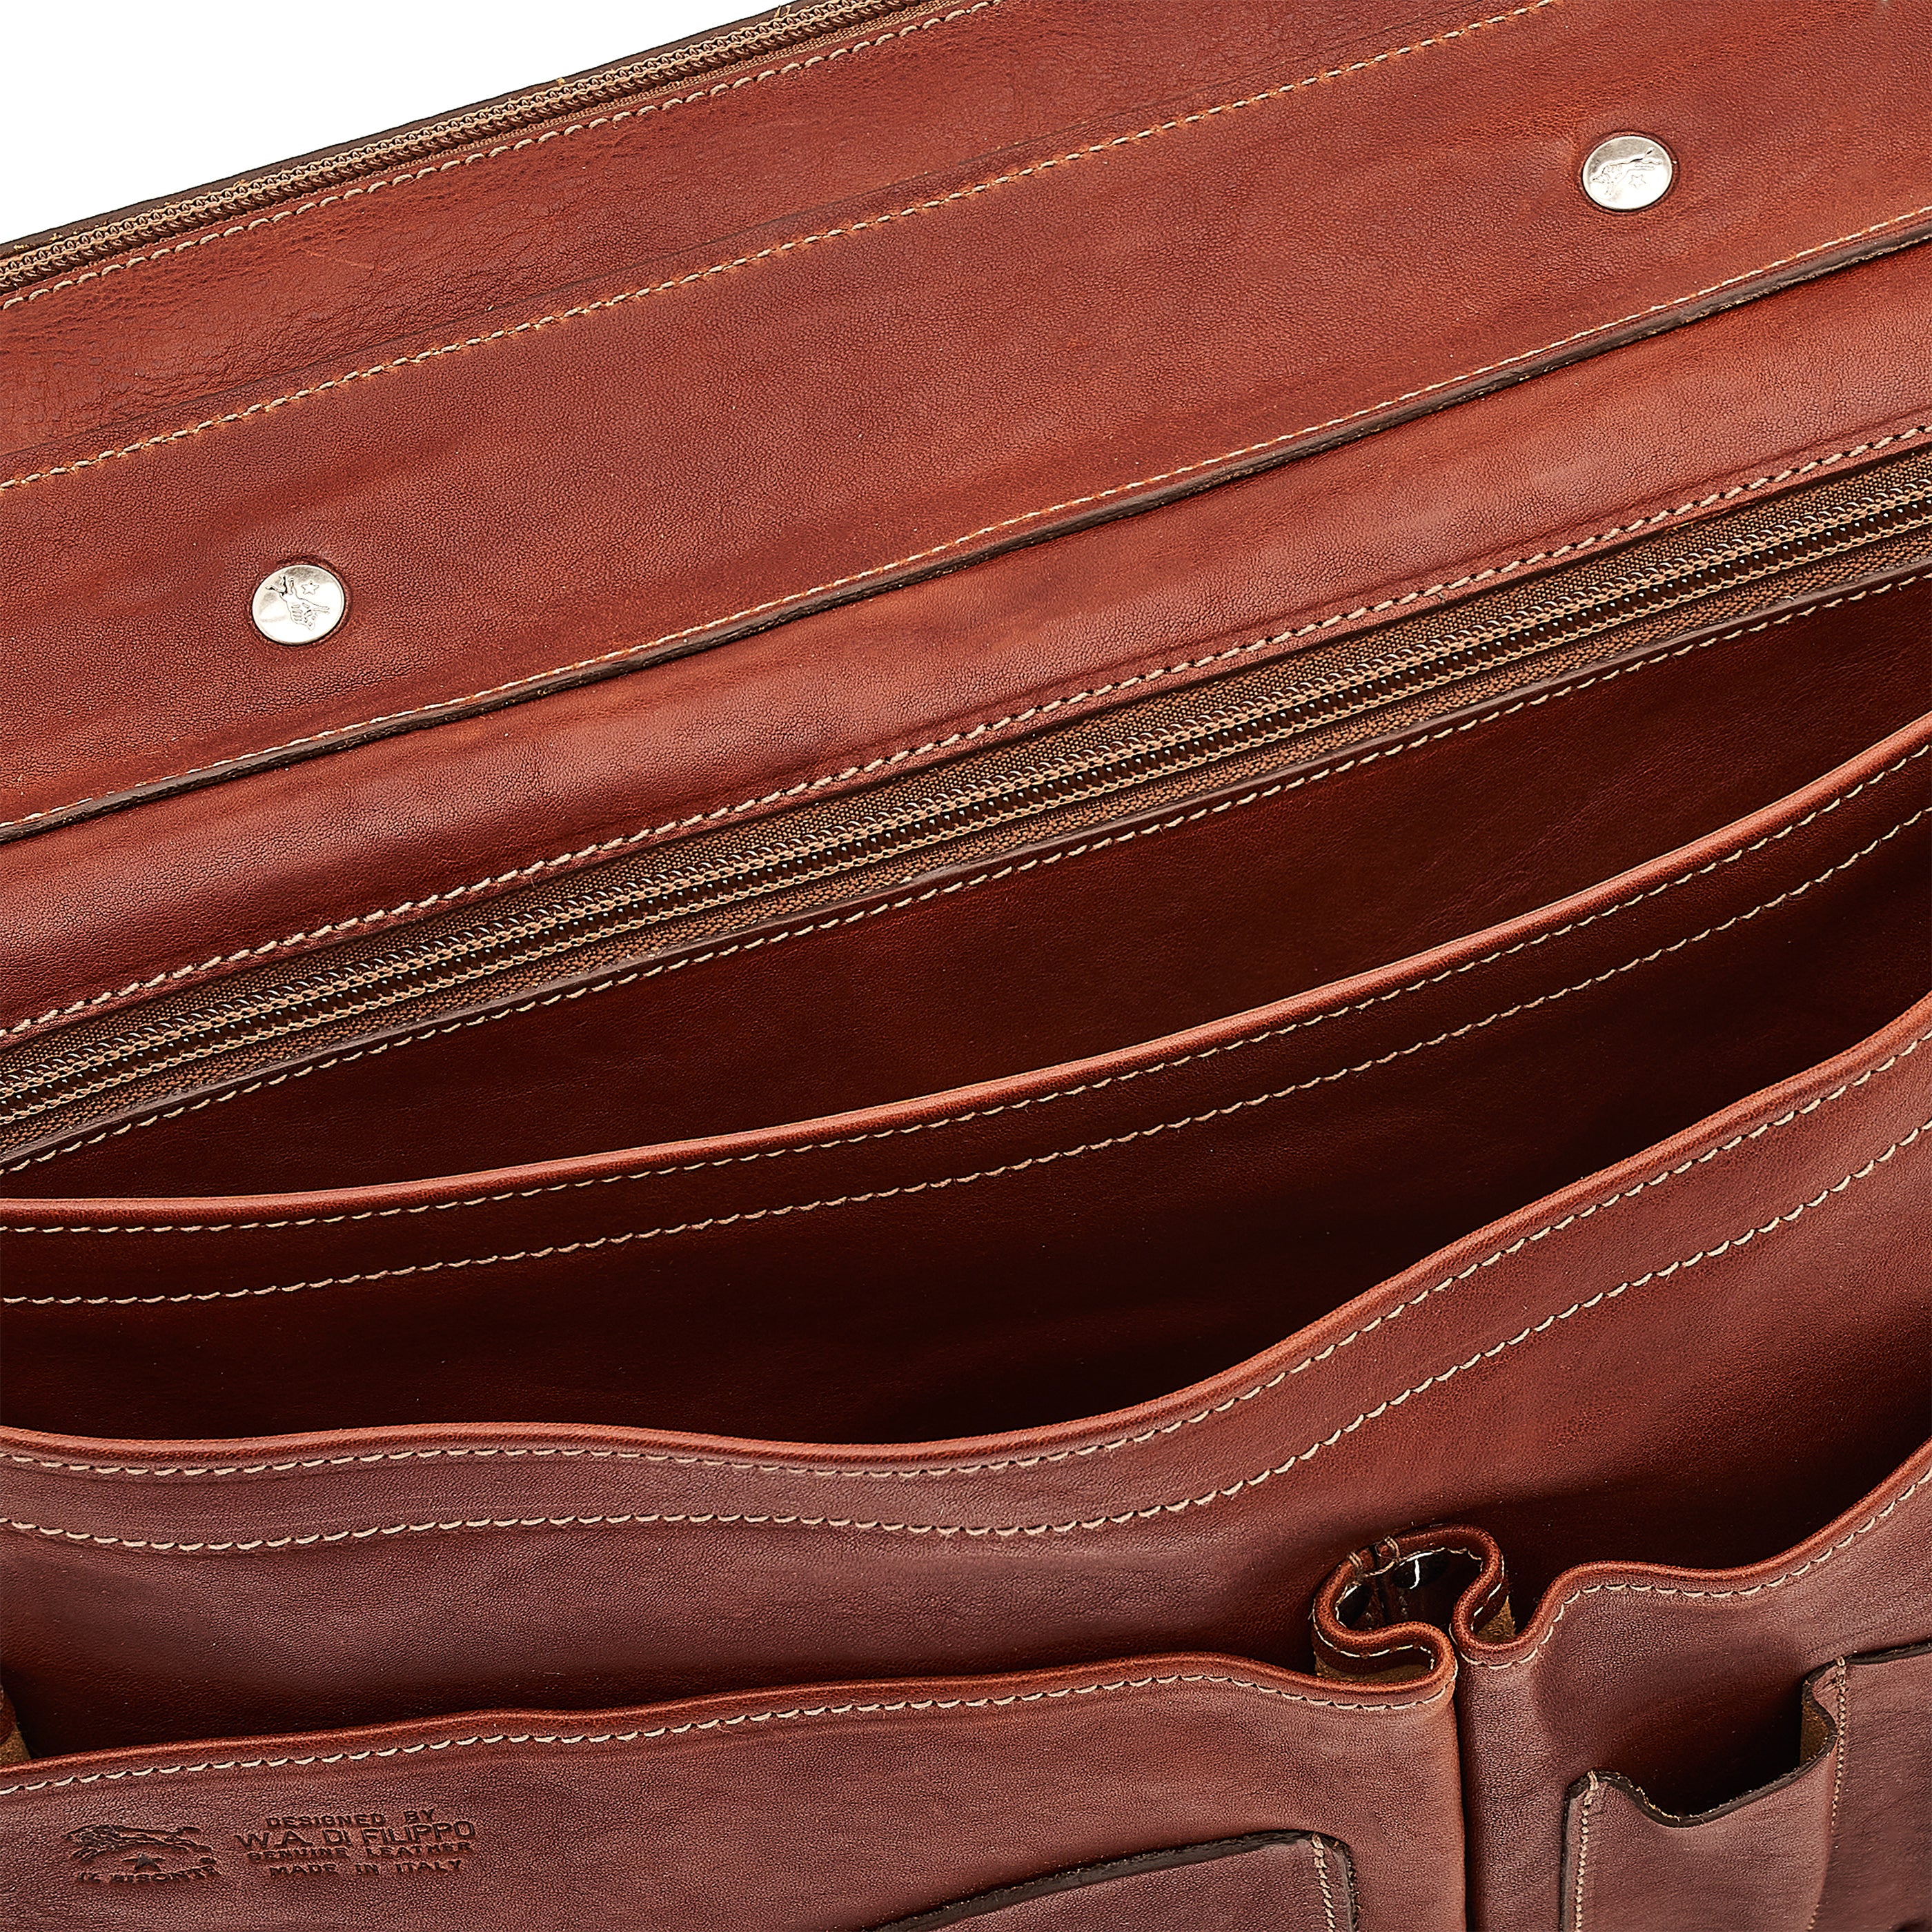 Briefcase in vintage leather color sepia